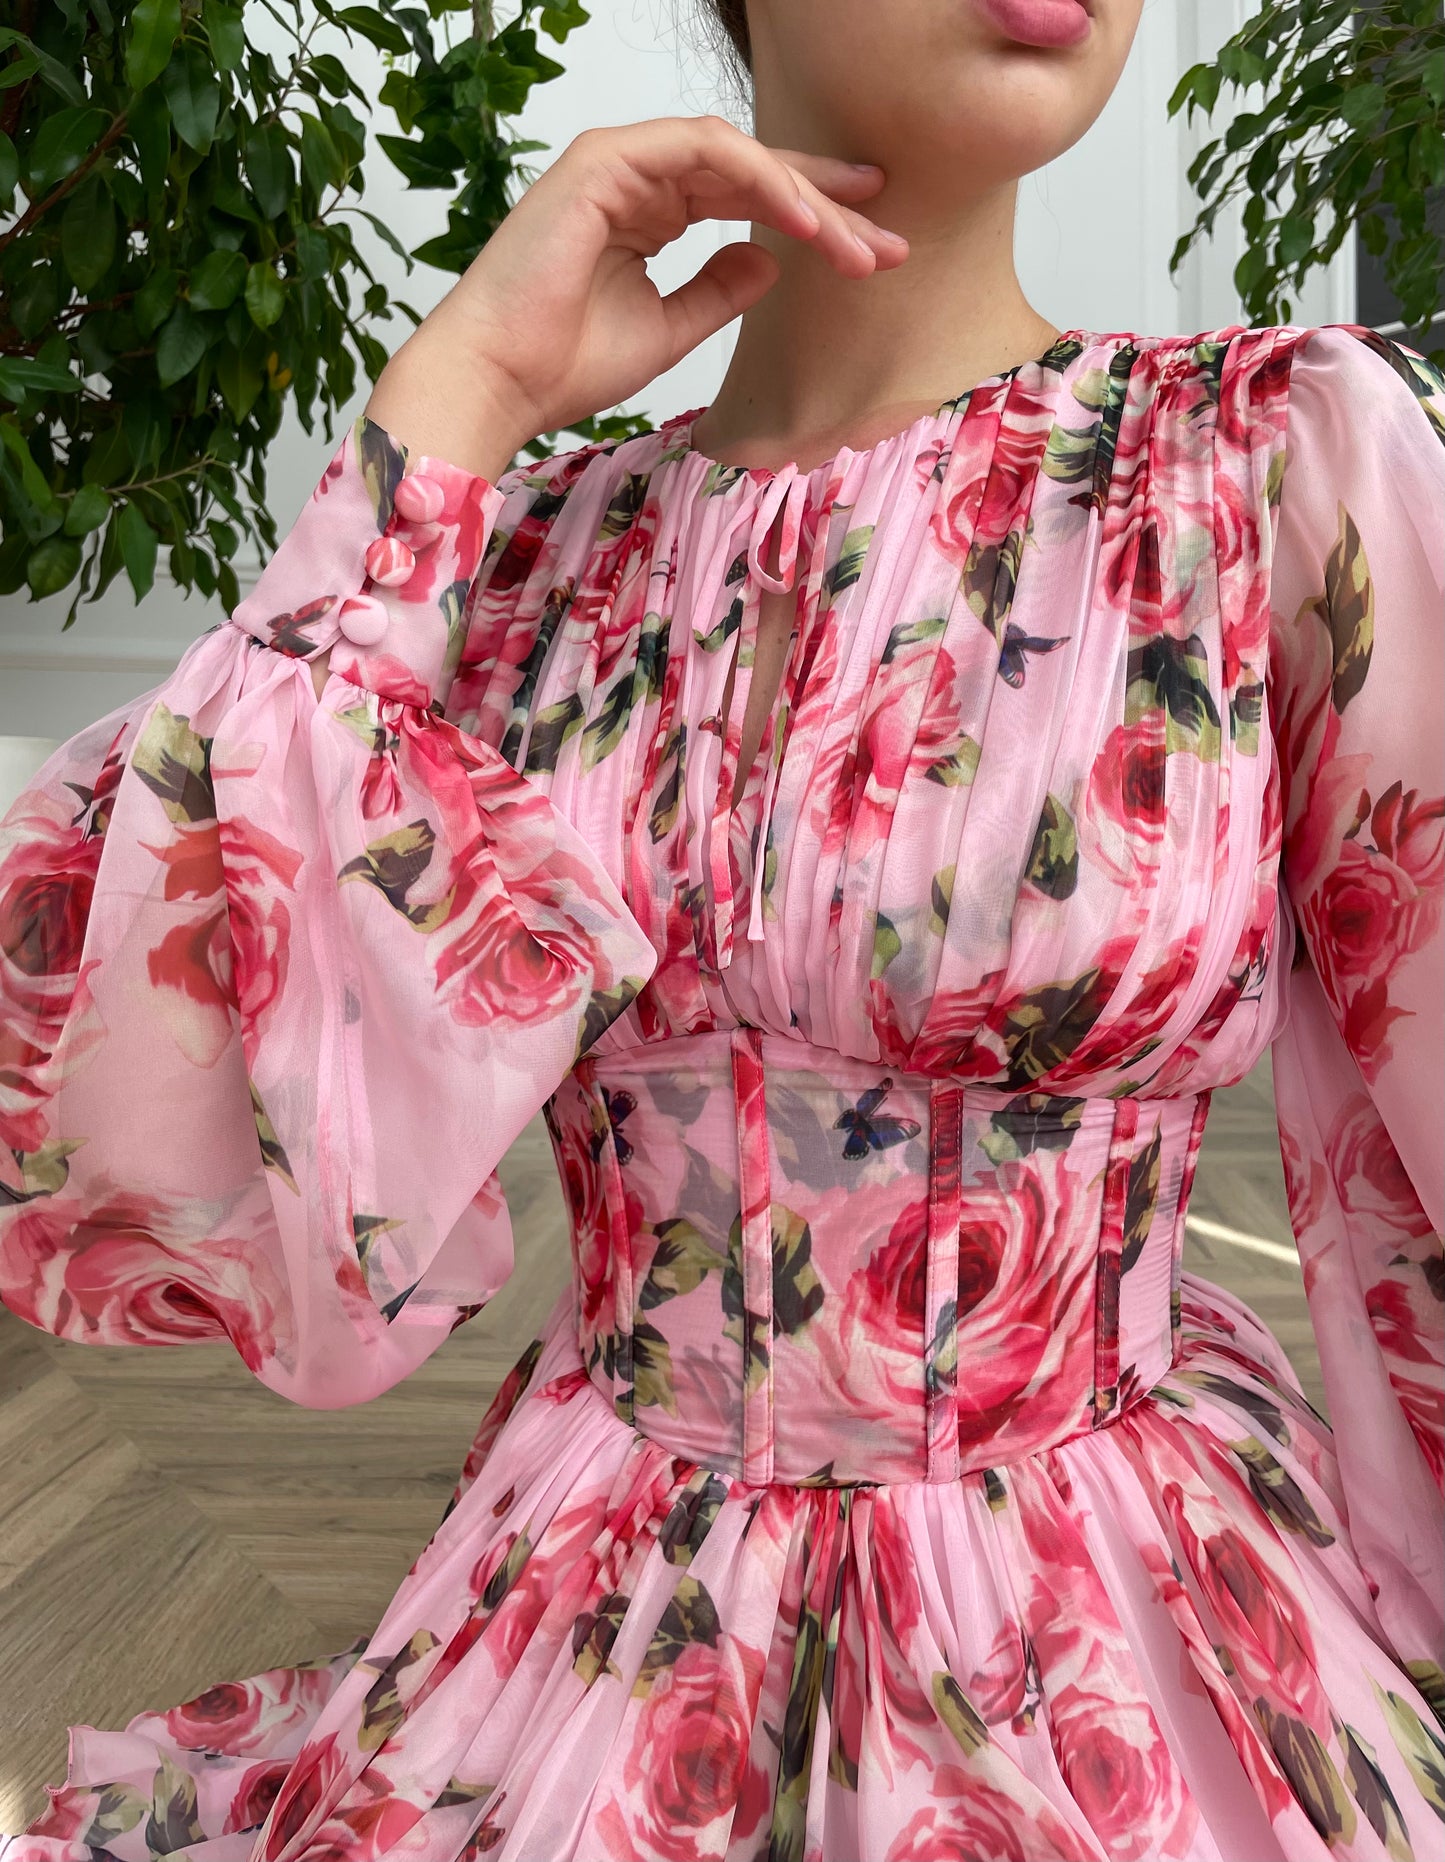 Pink mini dress with long sleeves and printed flowers